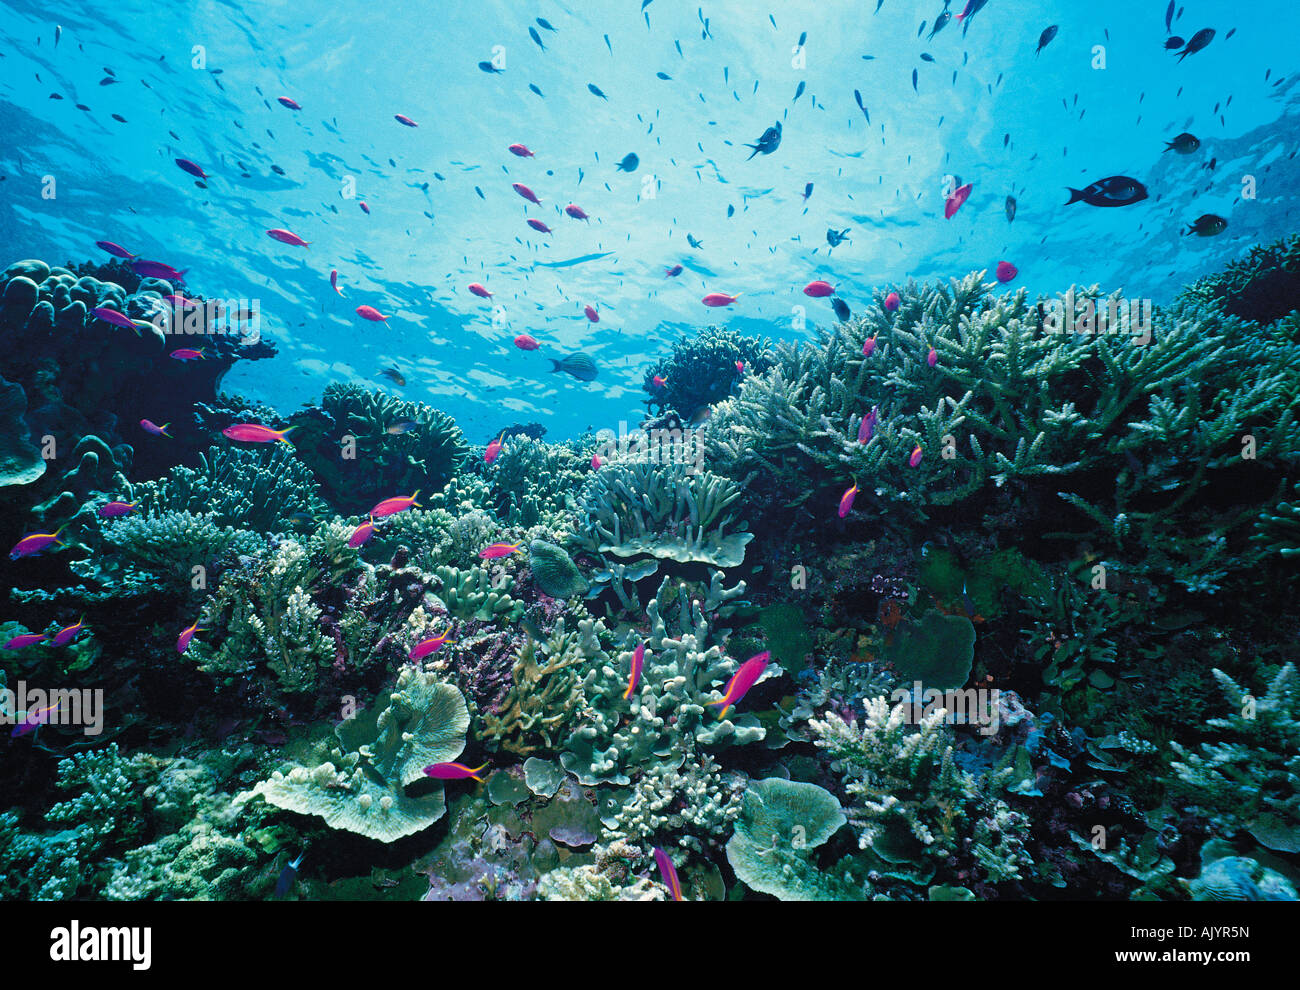 Environment & nature, Papua New Guinea, Coral Reef, Stock Photo